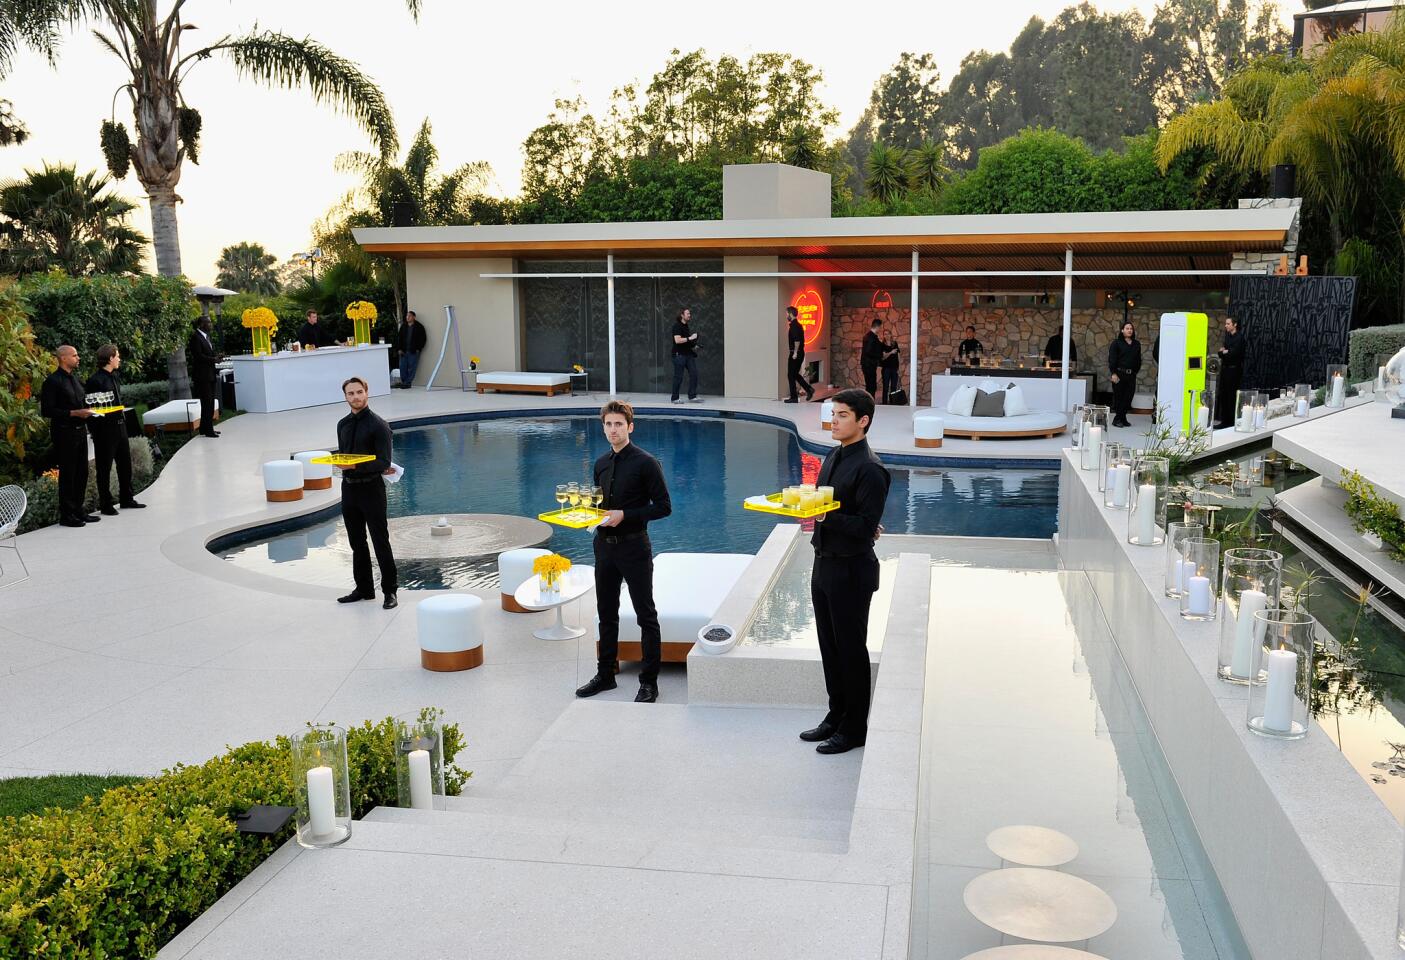 Art collector Eugenio Lopez Alonso opened his Mid-Century Modern home in Beverly Hills to the Jimmy Choo launch, where partygoers lounged poolside with drinks.